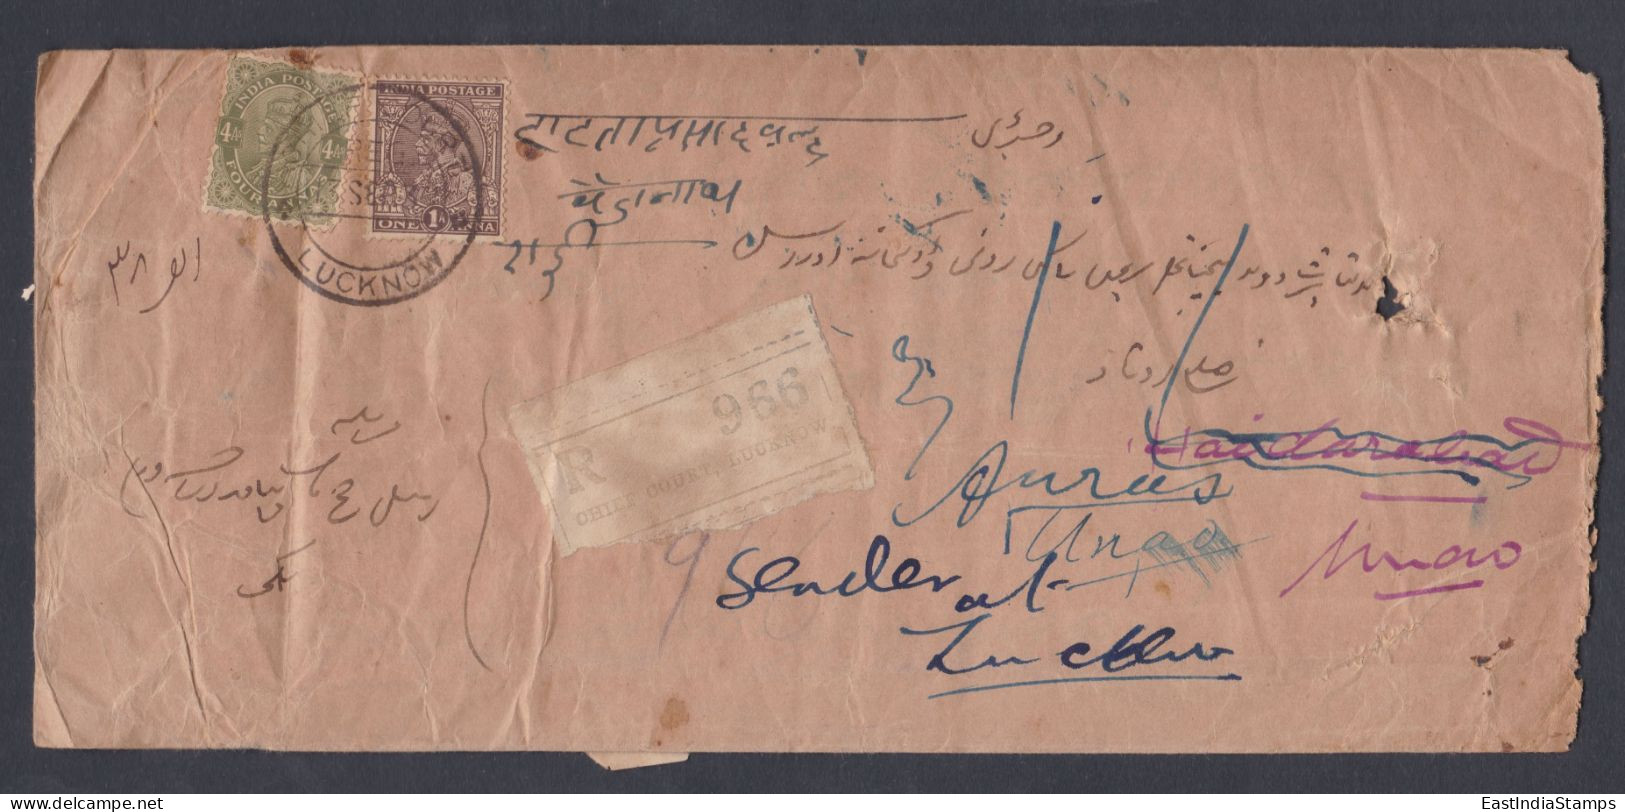 Inde British India 1937 Used Registered Cover, Civil Judge, Lucknow To Unao, Return Mail, King George V Stamps - 1911-35 Roi Georges V